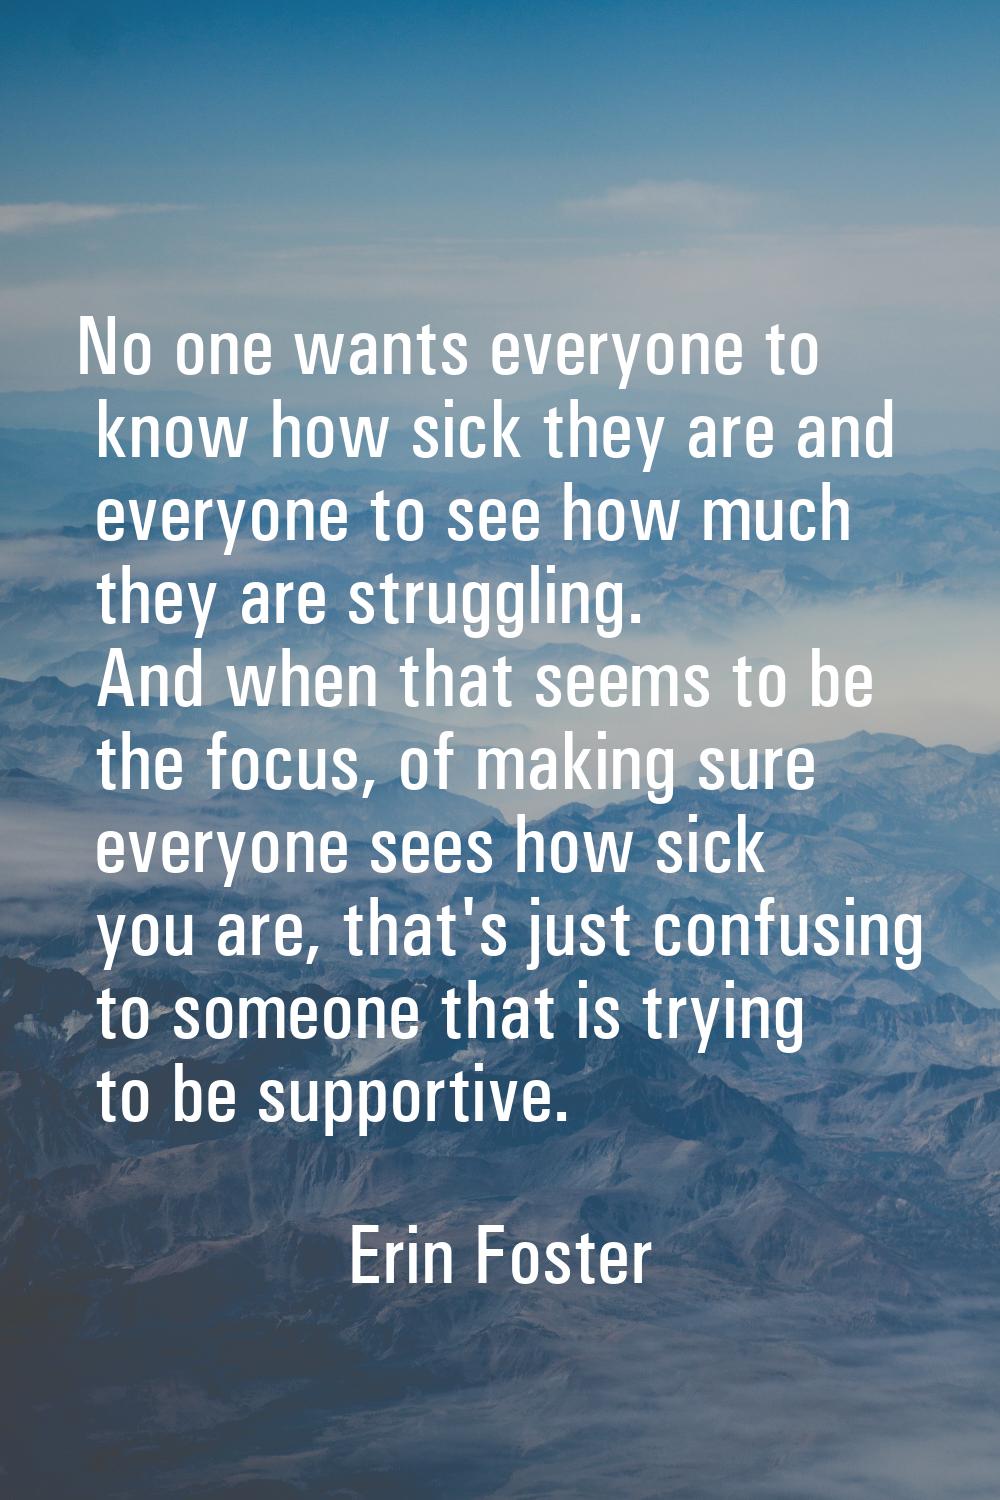 No one wants everyone to know how sick they are and everyone to see how much they are struggling. A